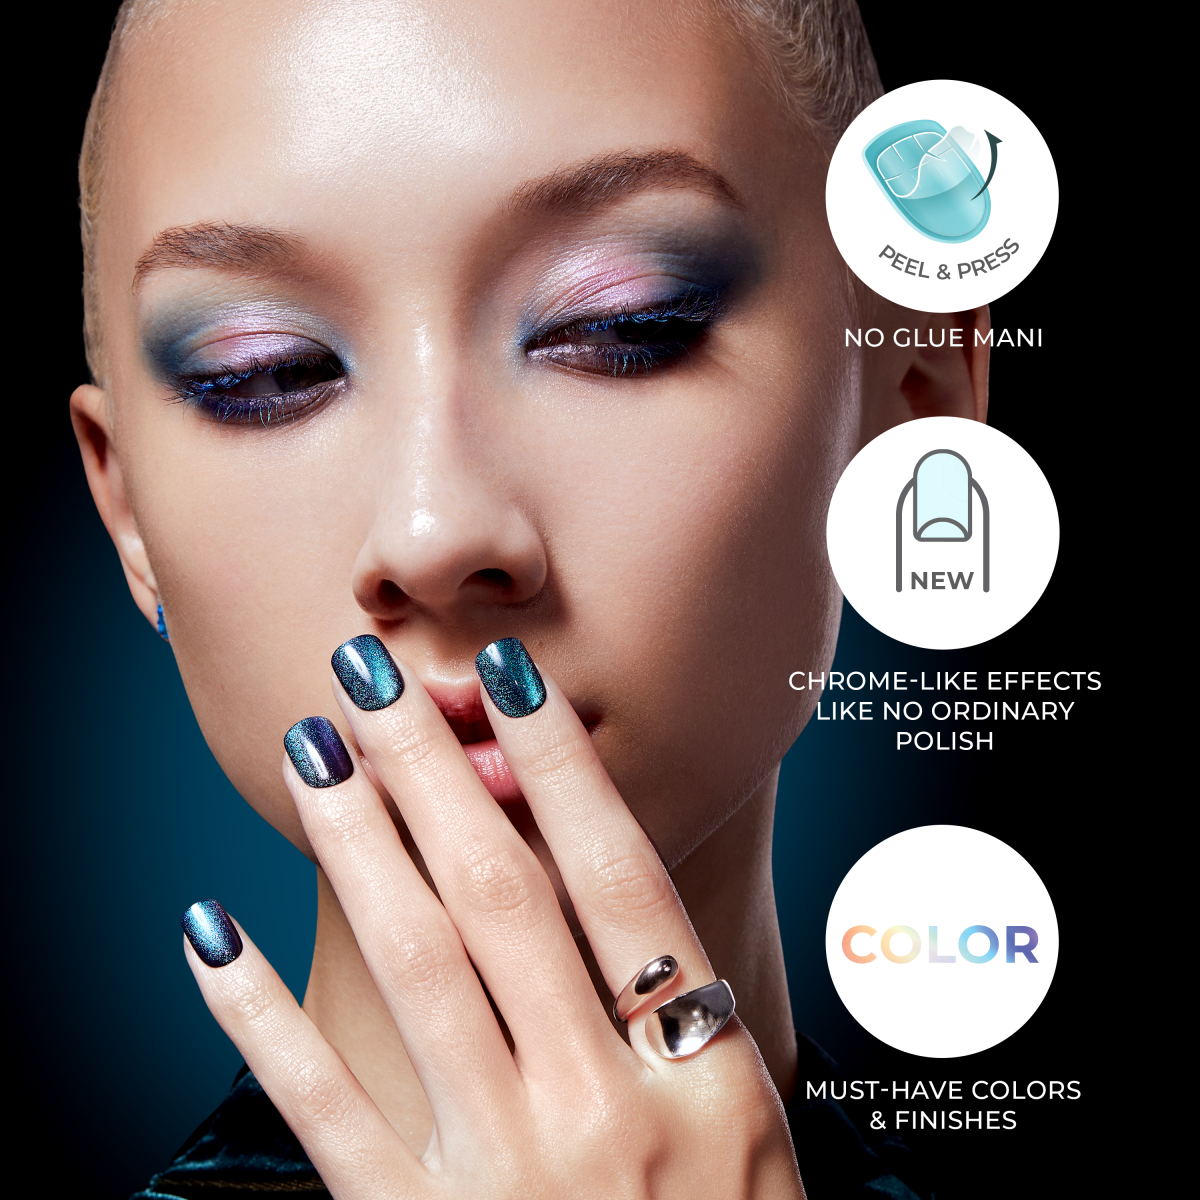 colorFX by imPRESS  Press-On Nails - Distraction